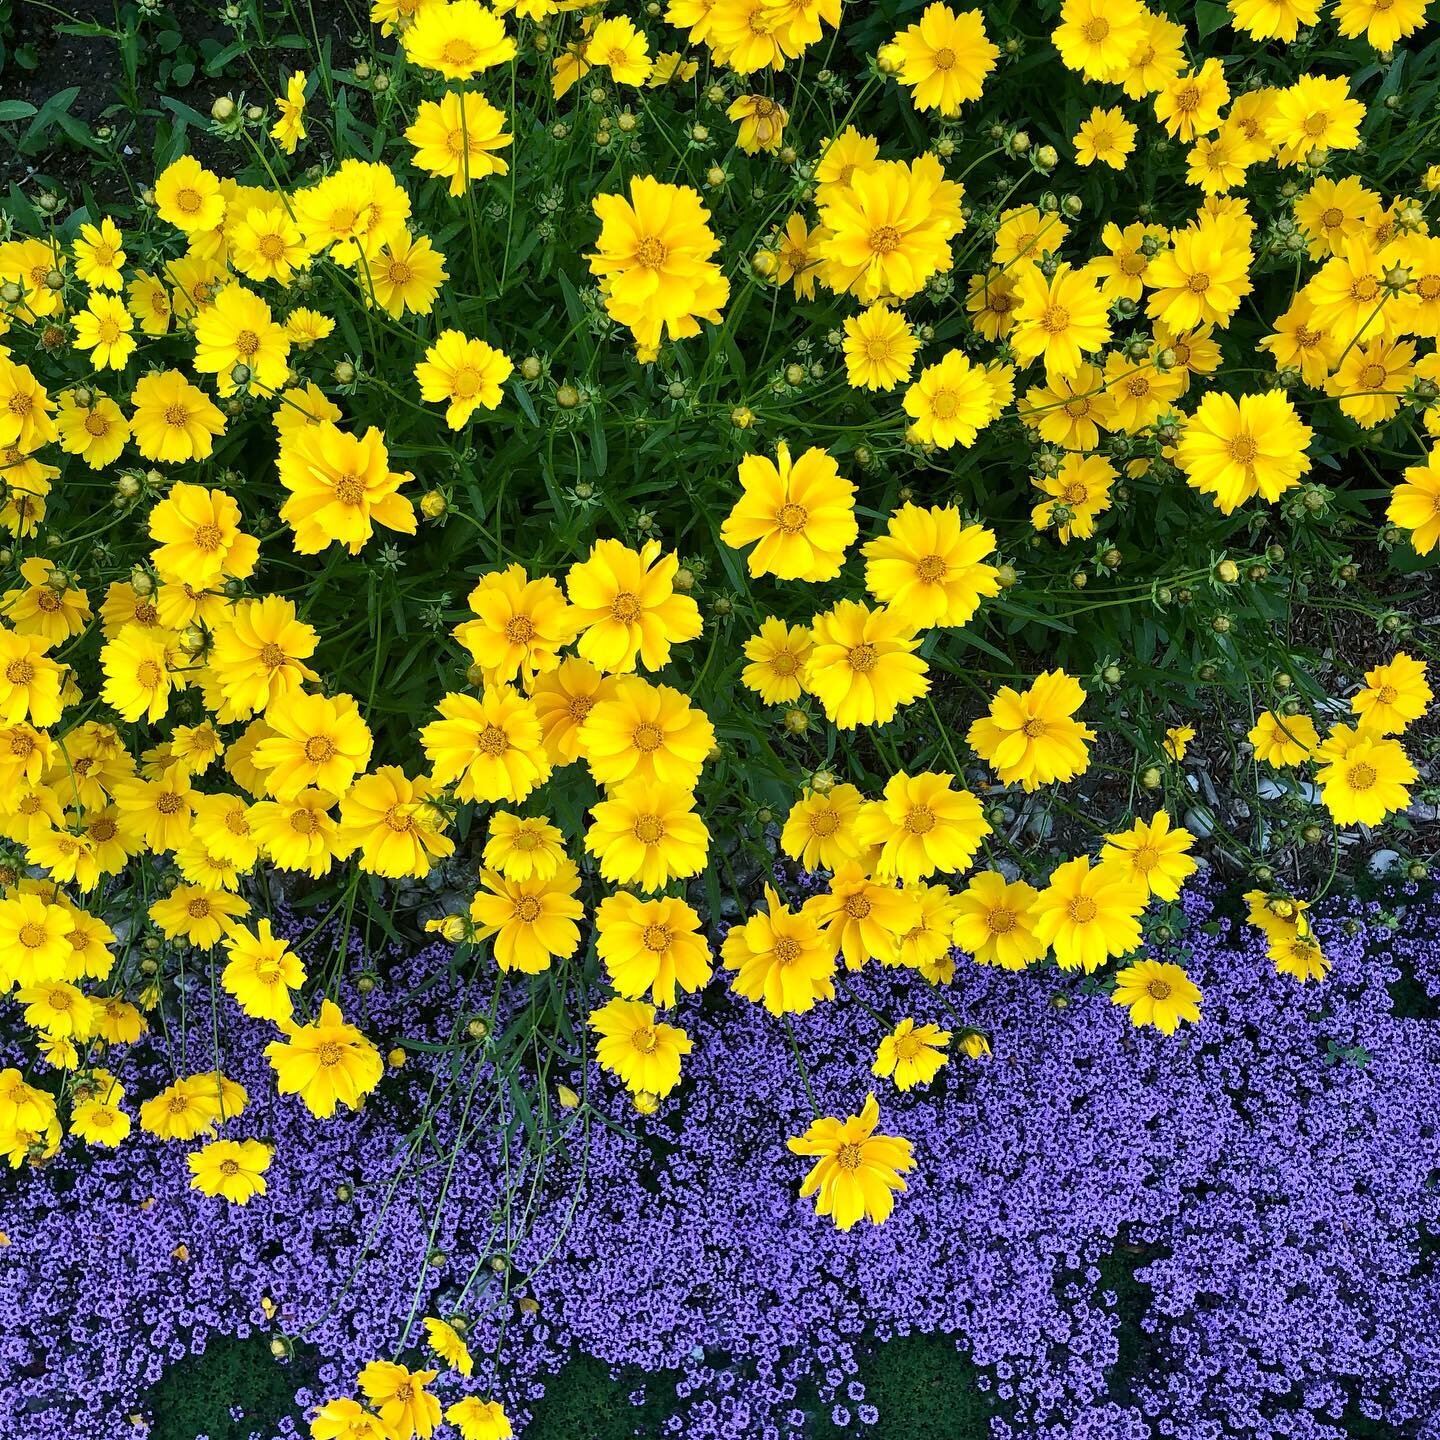 Coreopsis lanceolata

These were planted into a sunny border with poor soil, river stone &lsquo;mulch&rsquo;... and very little expectation. 

Fast forward two years and they are stealing the show 😍

With Coreopsis l., expect a profusion of yellow b